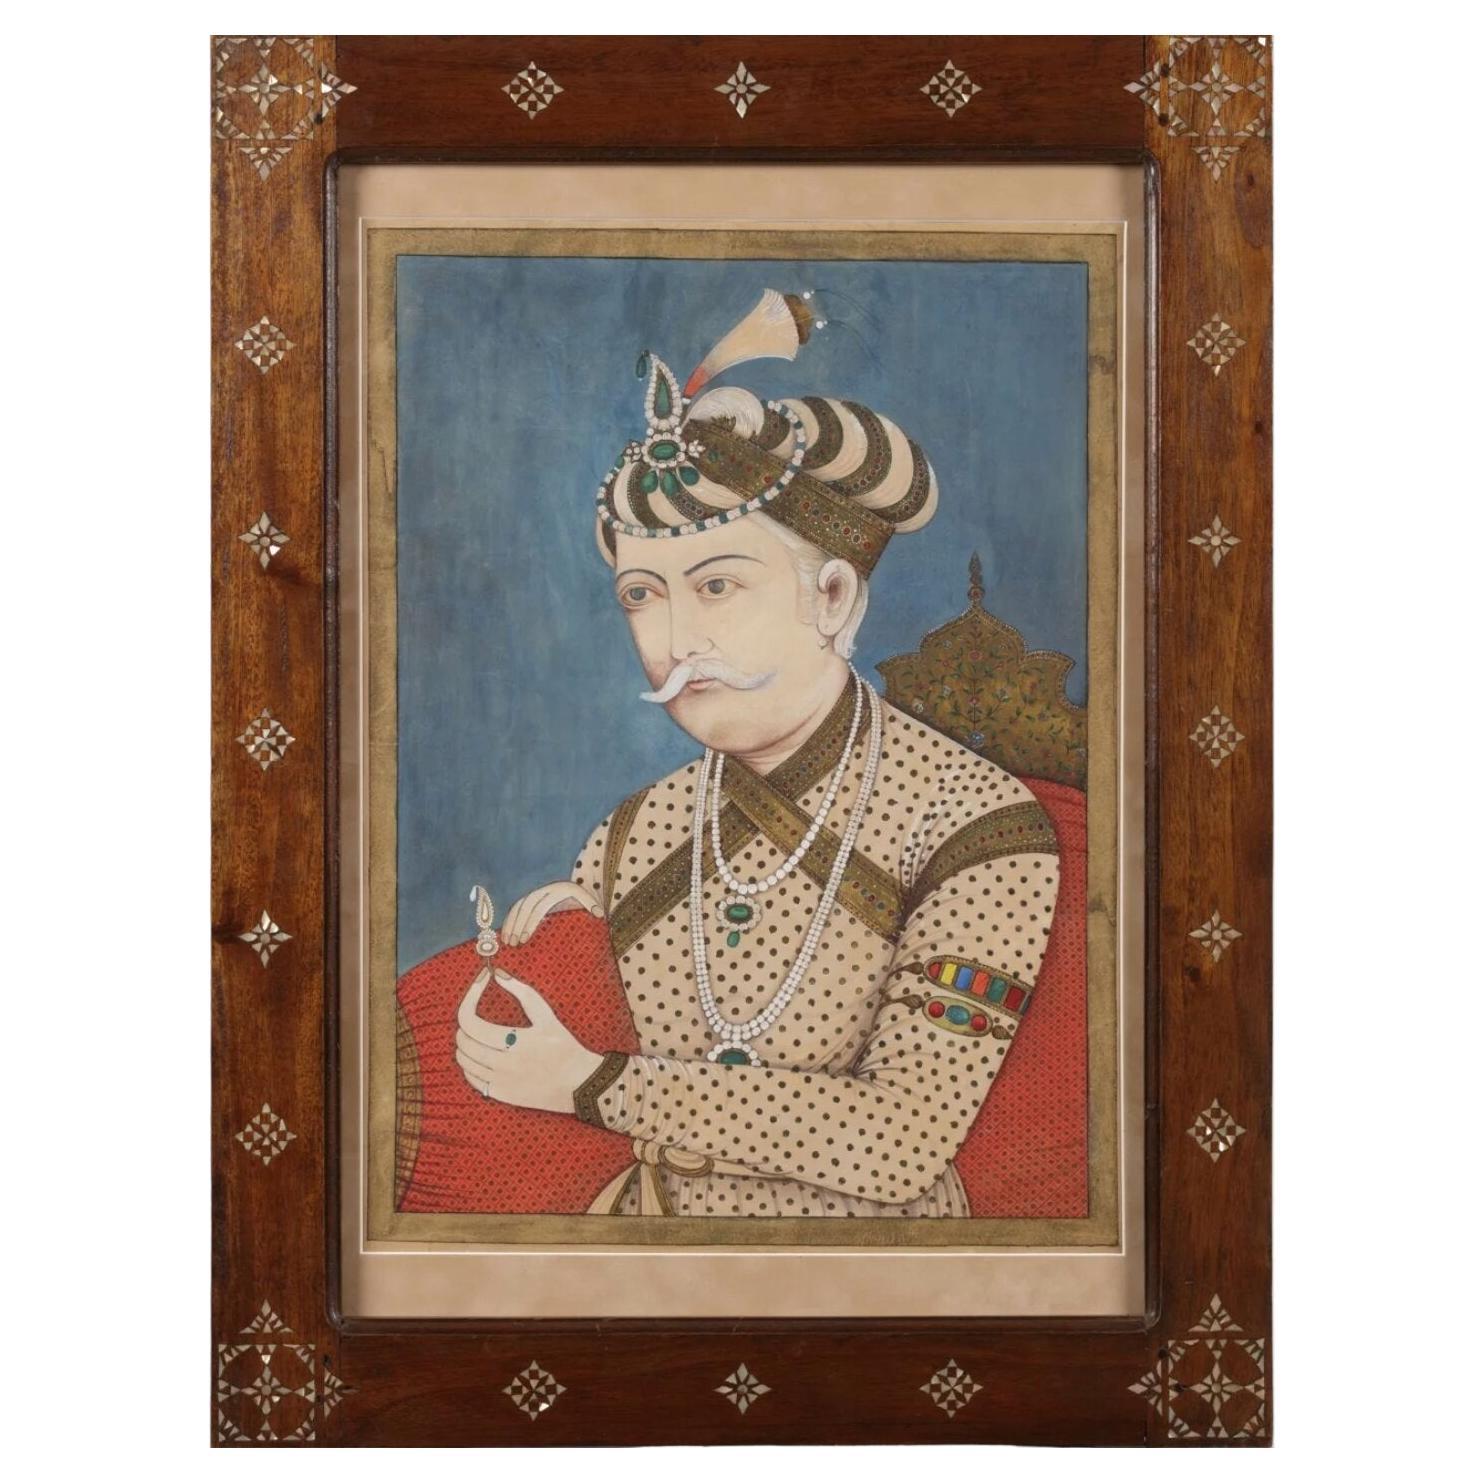 Indian Portrait Painting of Mughal Emperor Akbar the Great, 19th Century